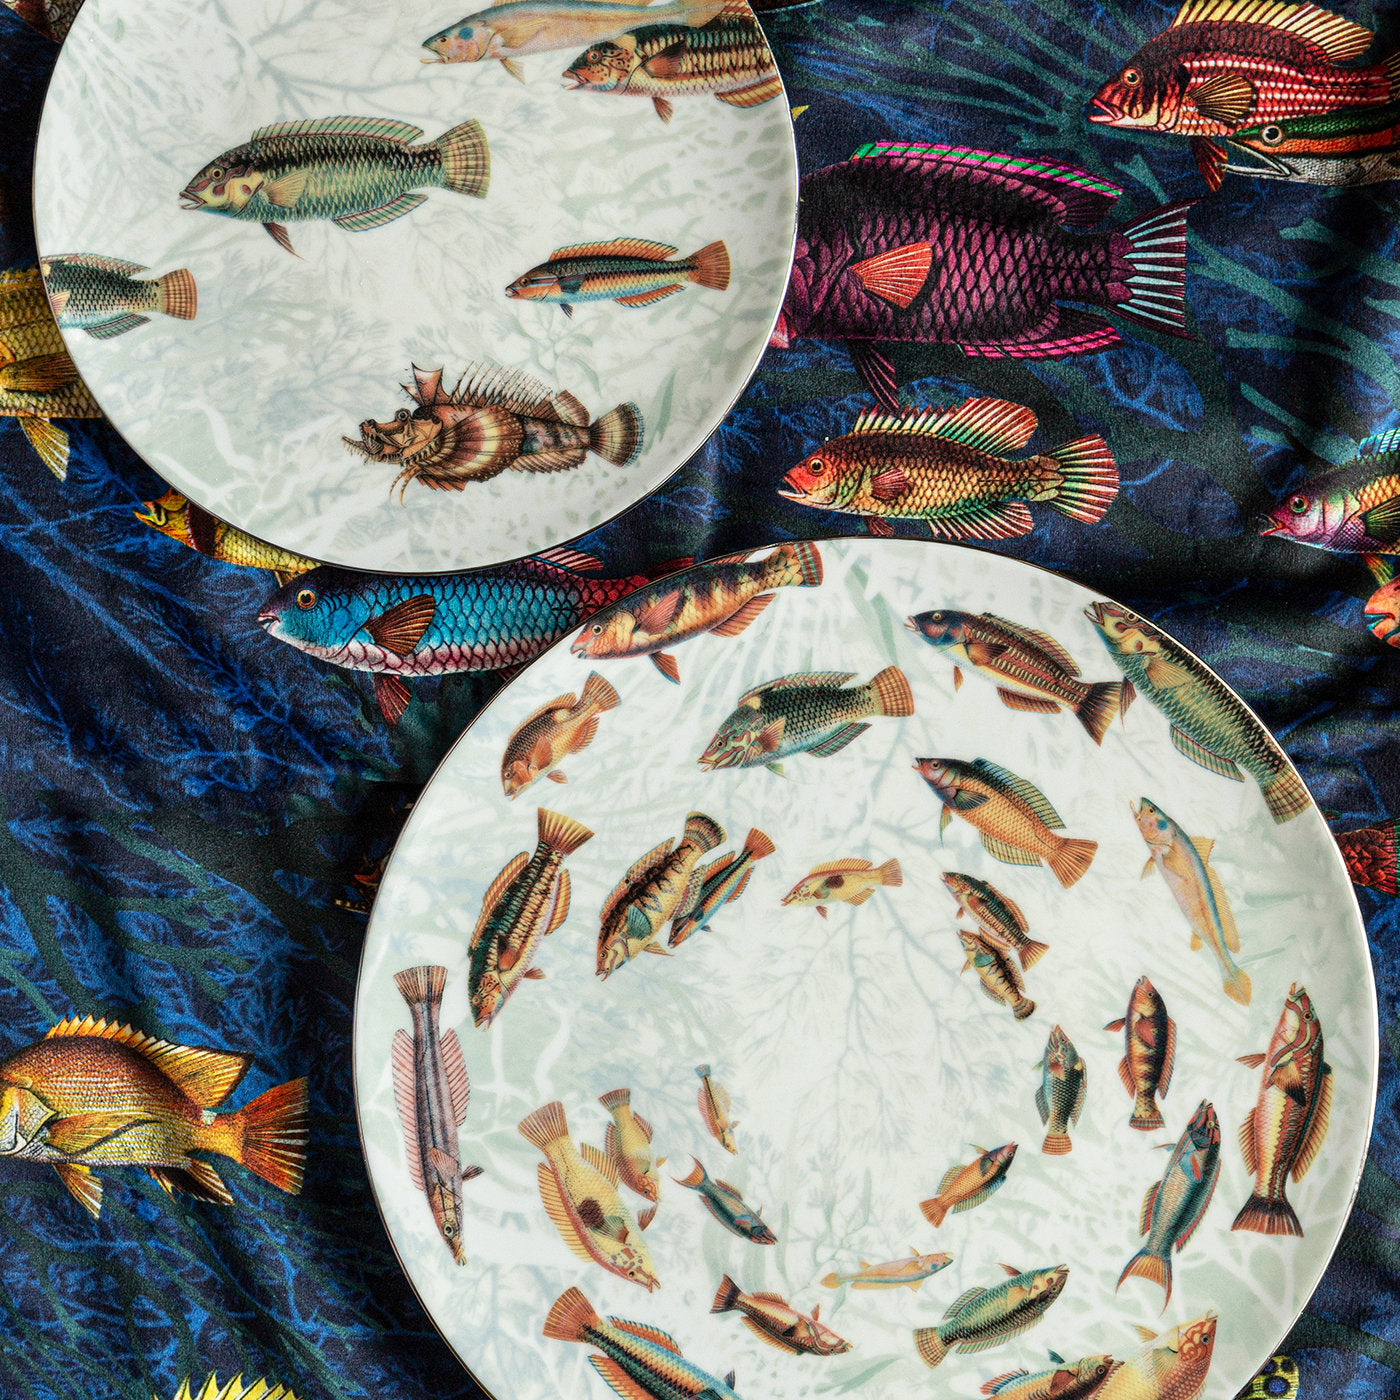 Amami Porcelain Dinner Plate With Tropical Fish #5 - Alternative view 1